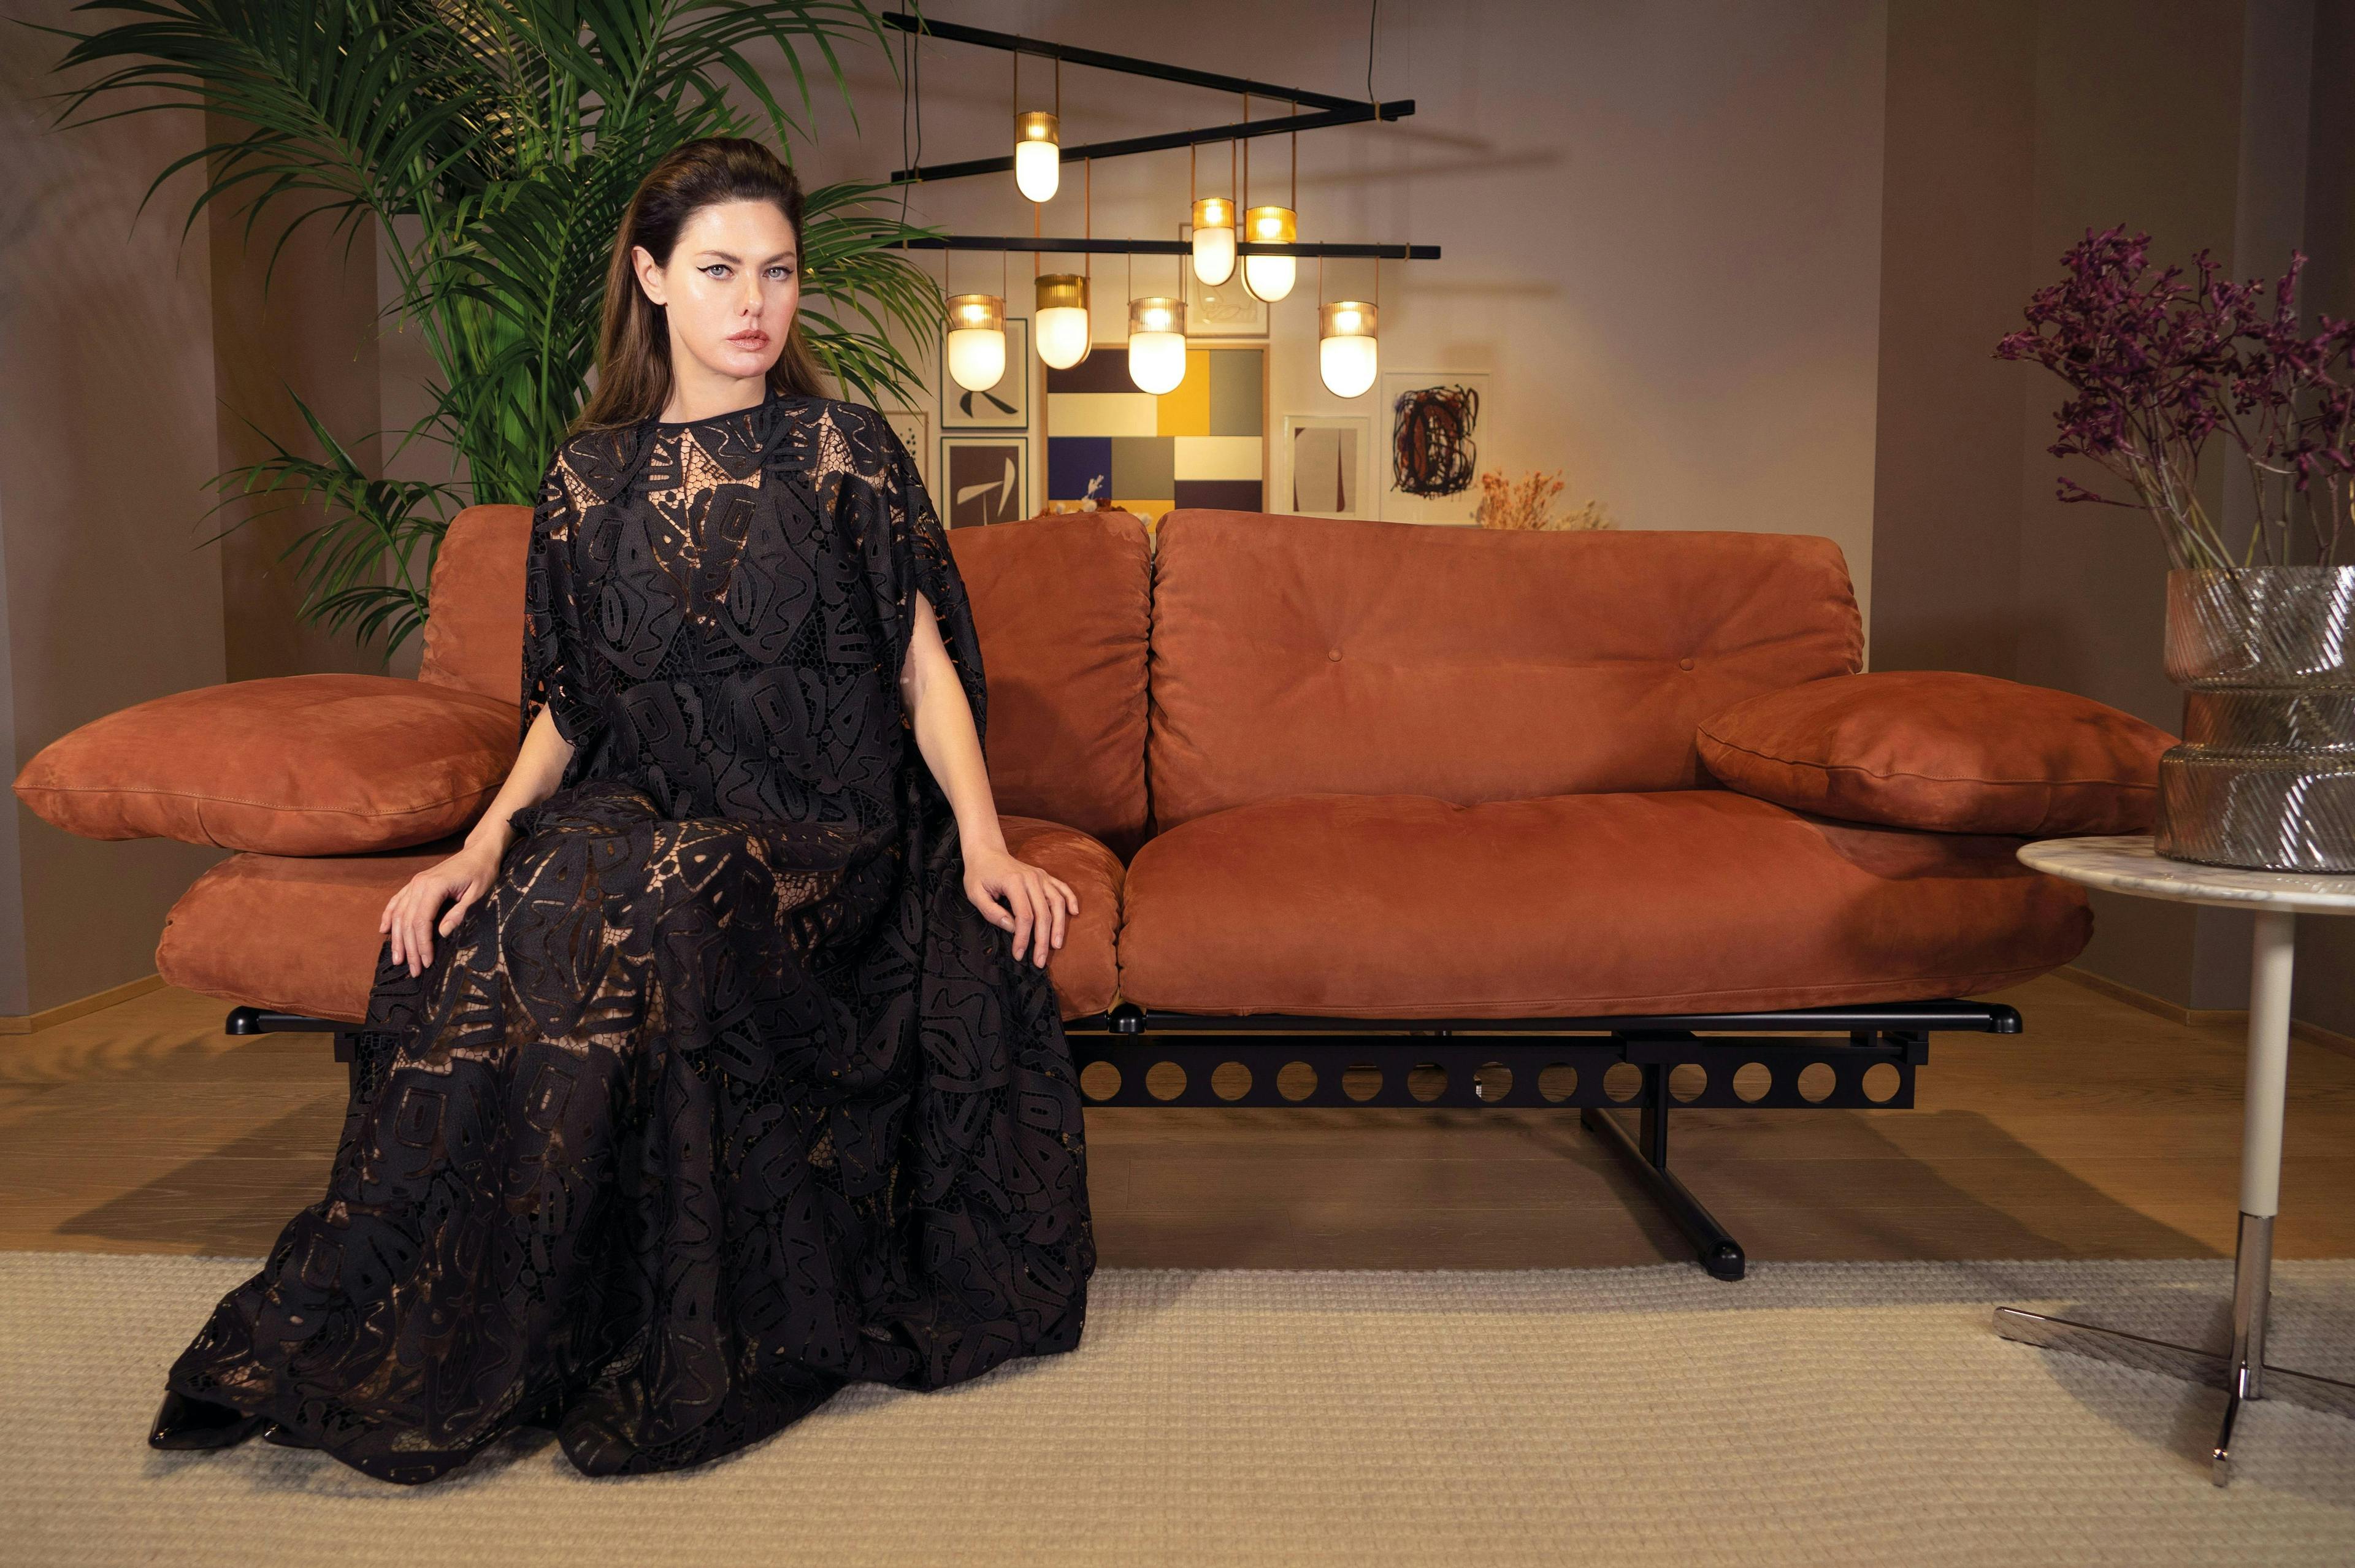 couch dress formal wear evening dress living room fashion adult female person woman